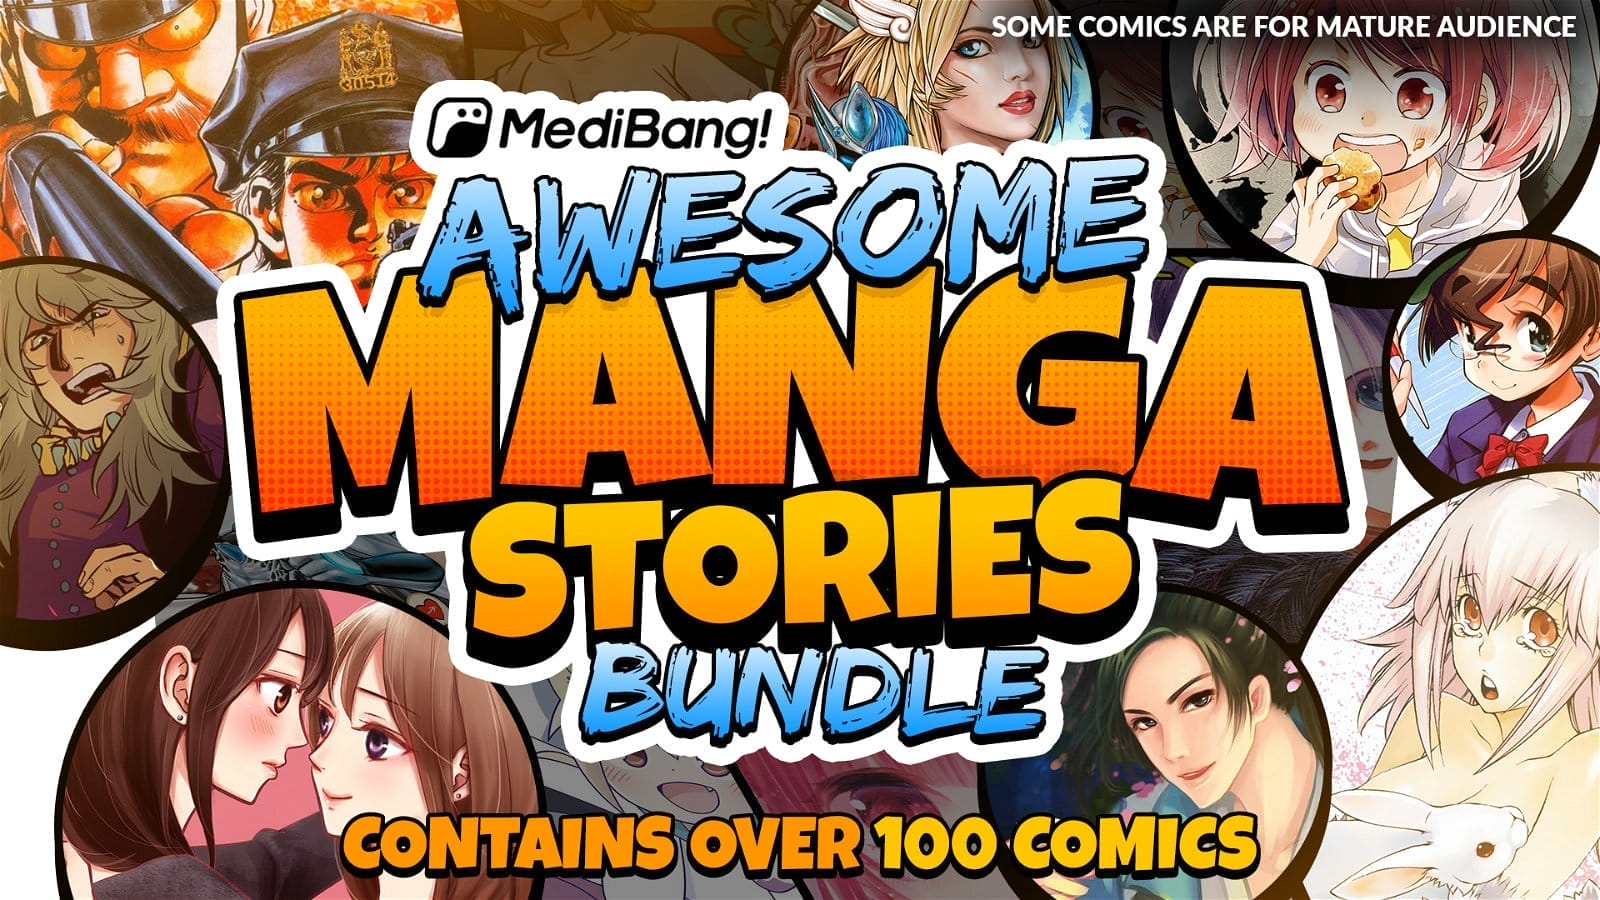 MediBang! Awesome Manga Stories Bundle - Contains over 100 comics! Some comics are for mature audiences.